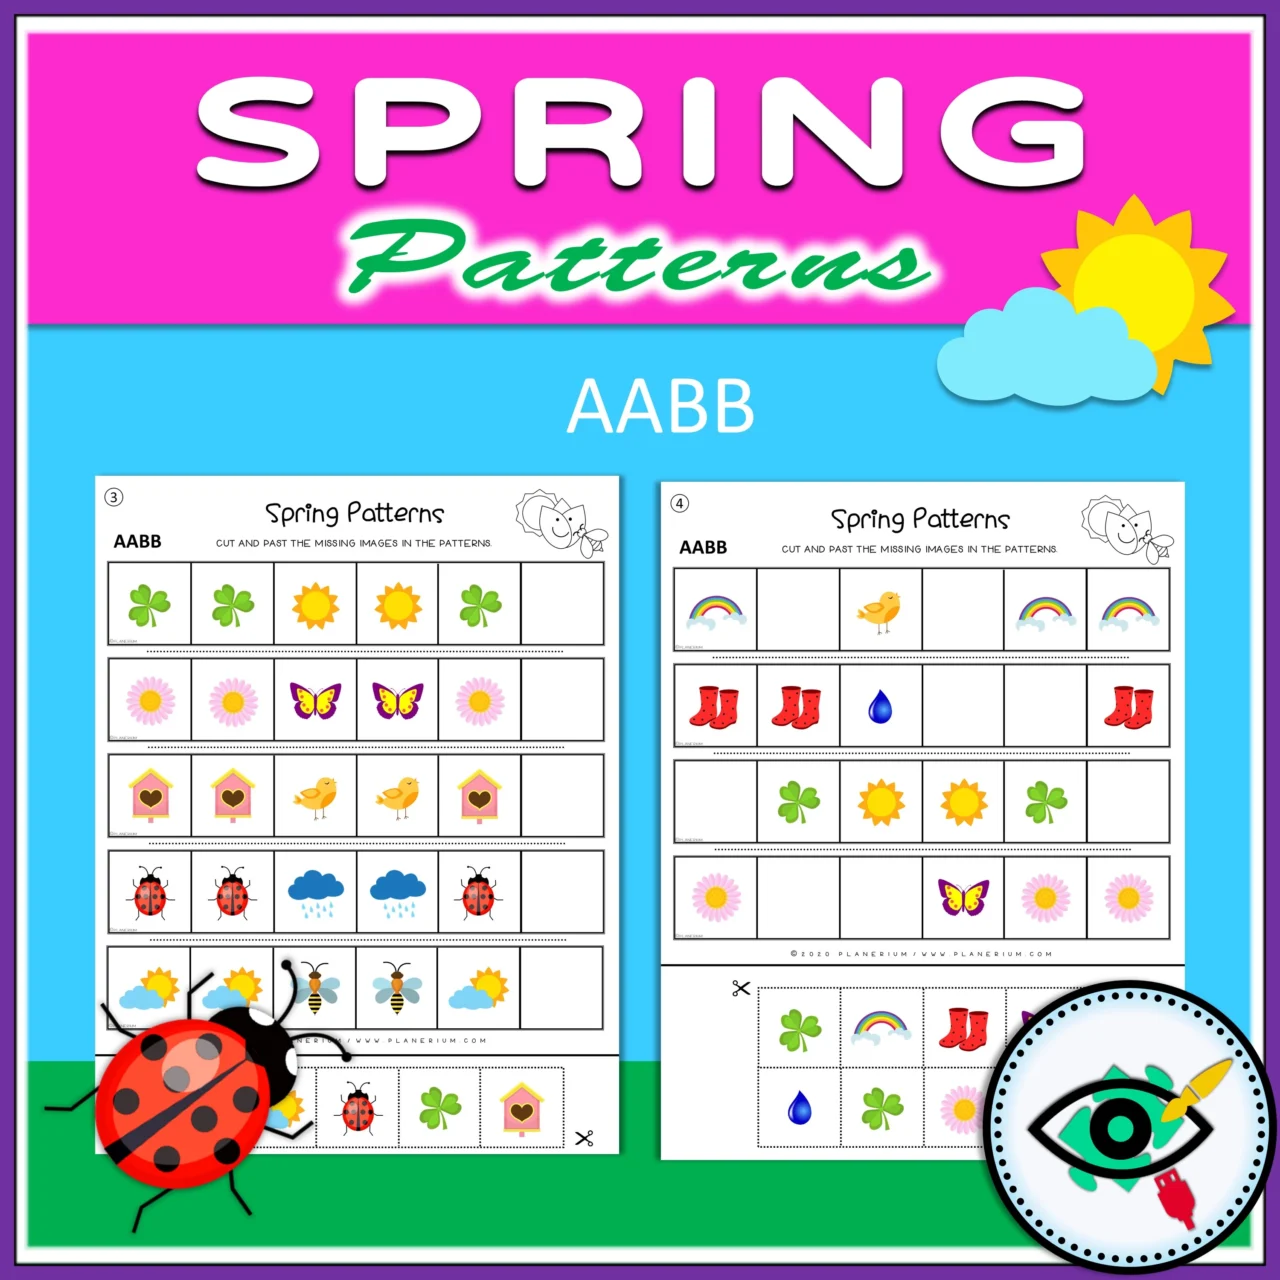 Spring - Patterns Activity - Image Title 3